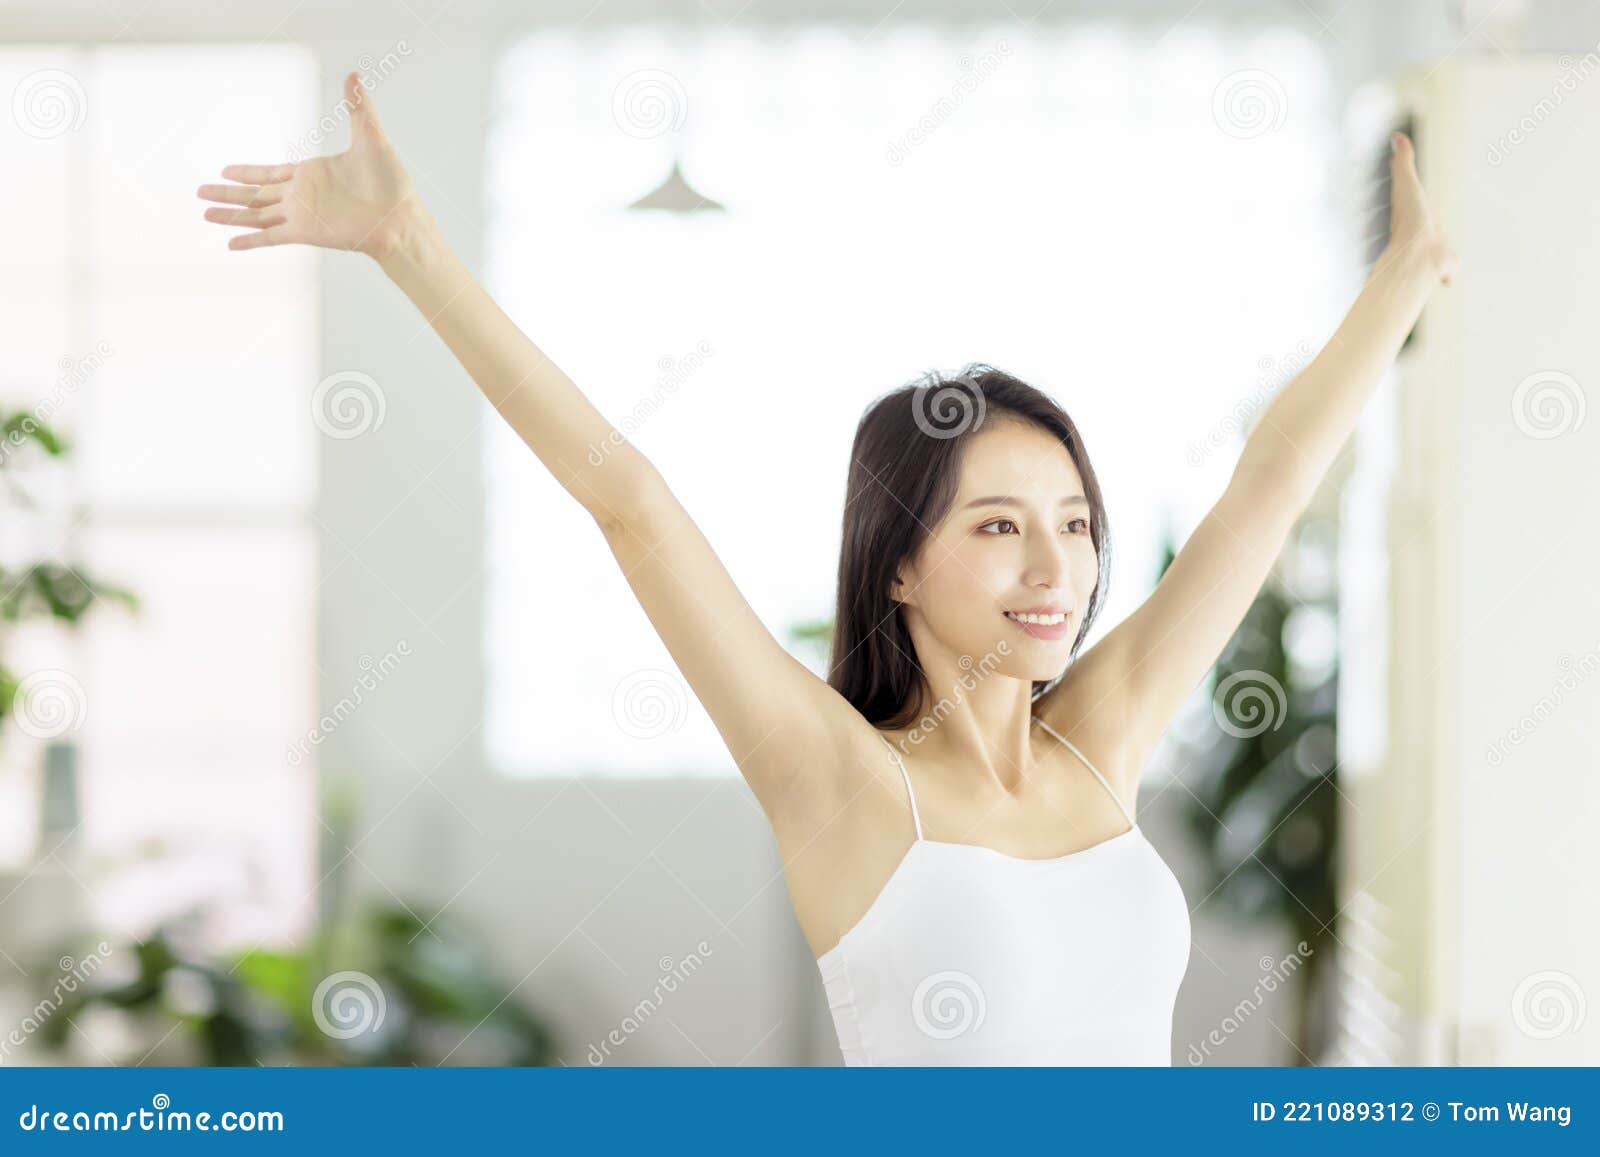 Young Woman Smiling and Taking a Deep Breath in Living Room at Morning ...